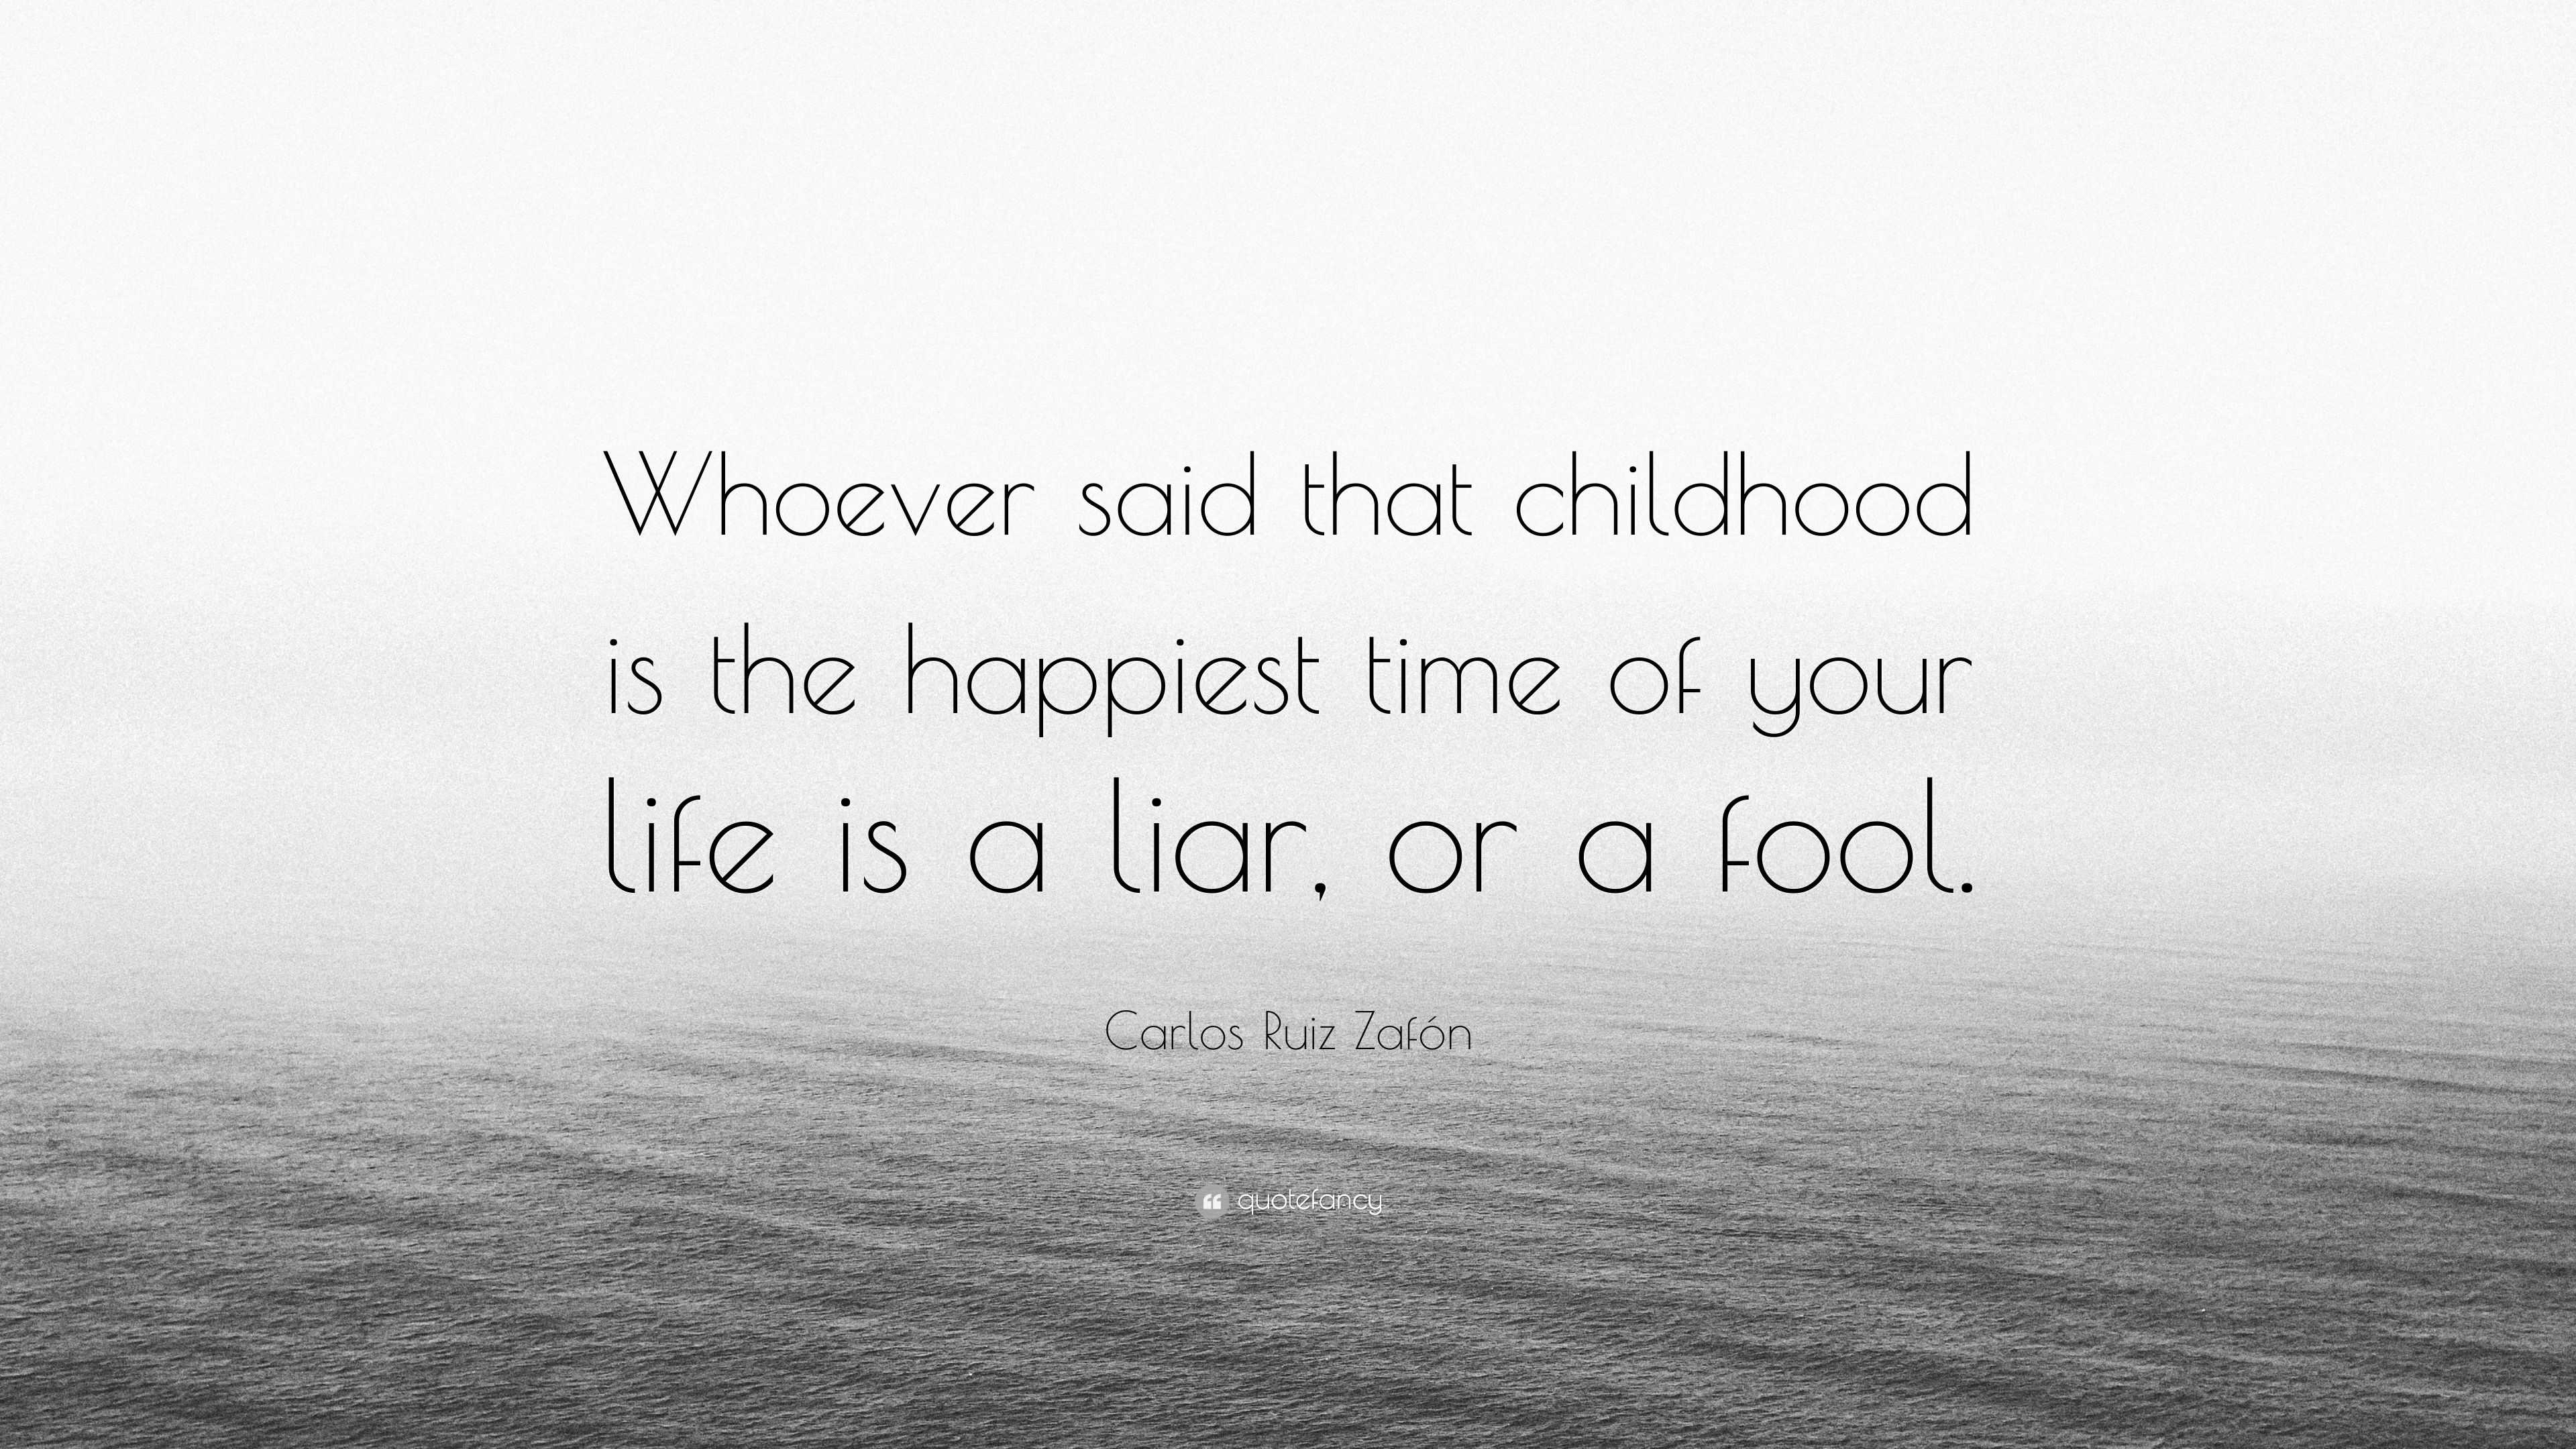 Carlos Ruiz Zaf³n Quote “Whoever said that childhood is the happiest time of your